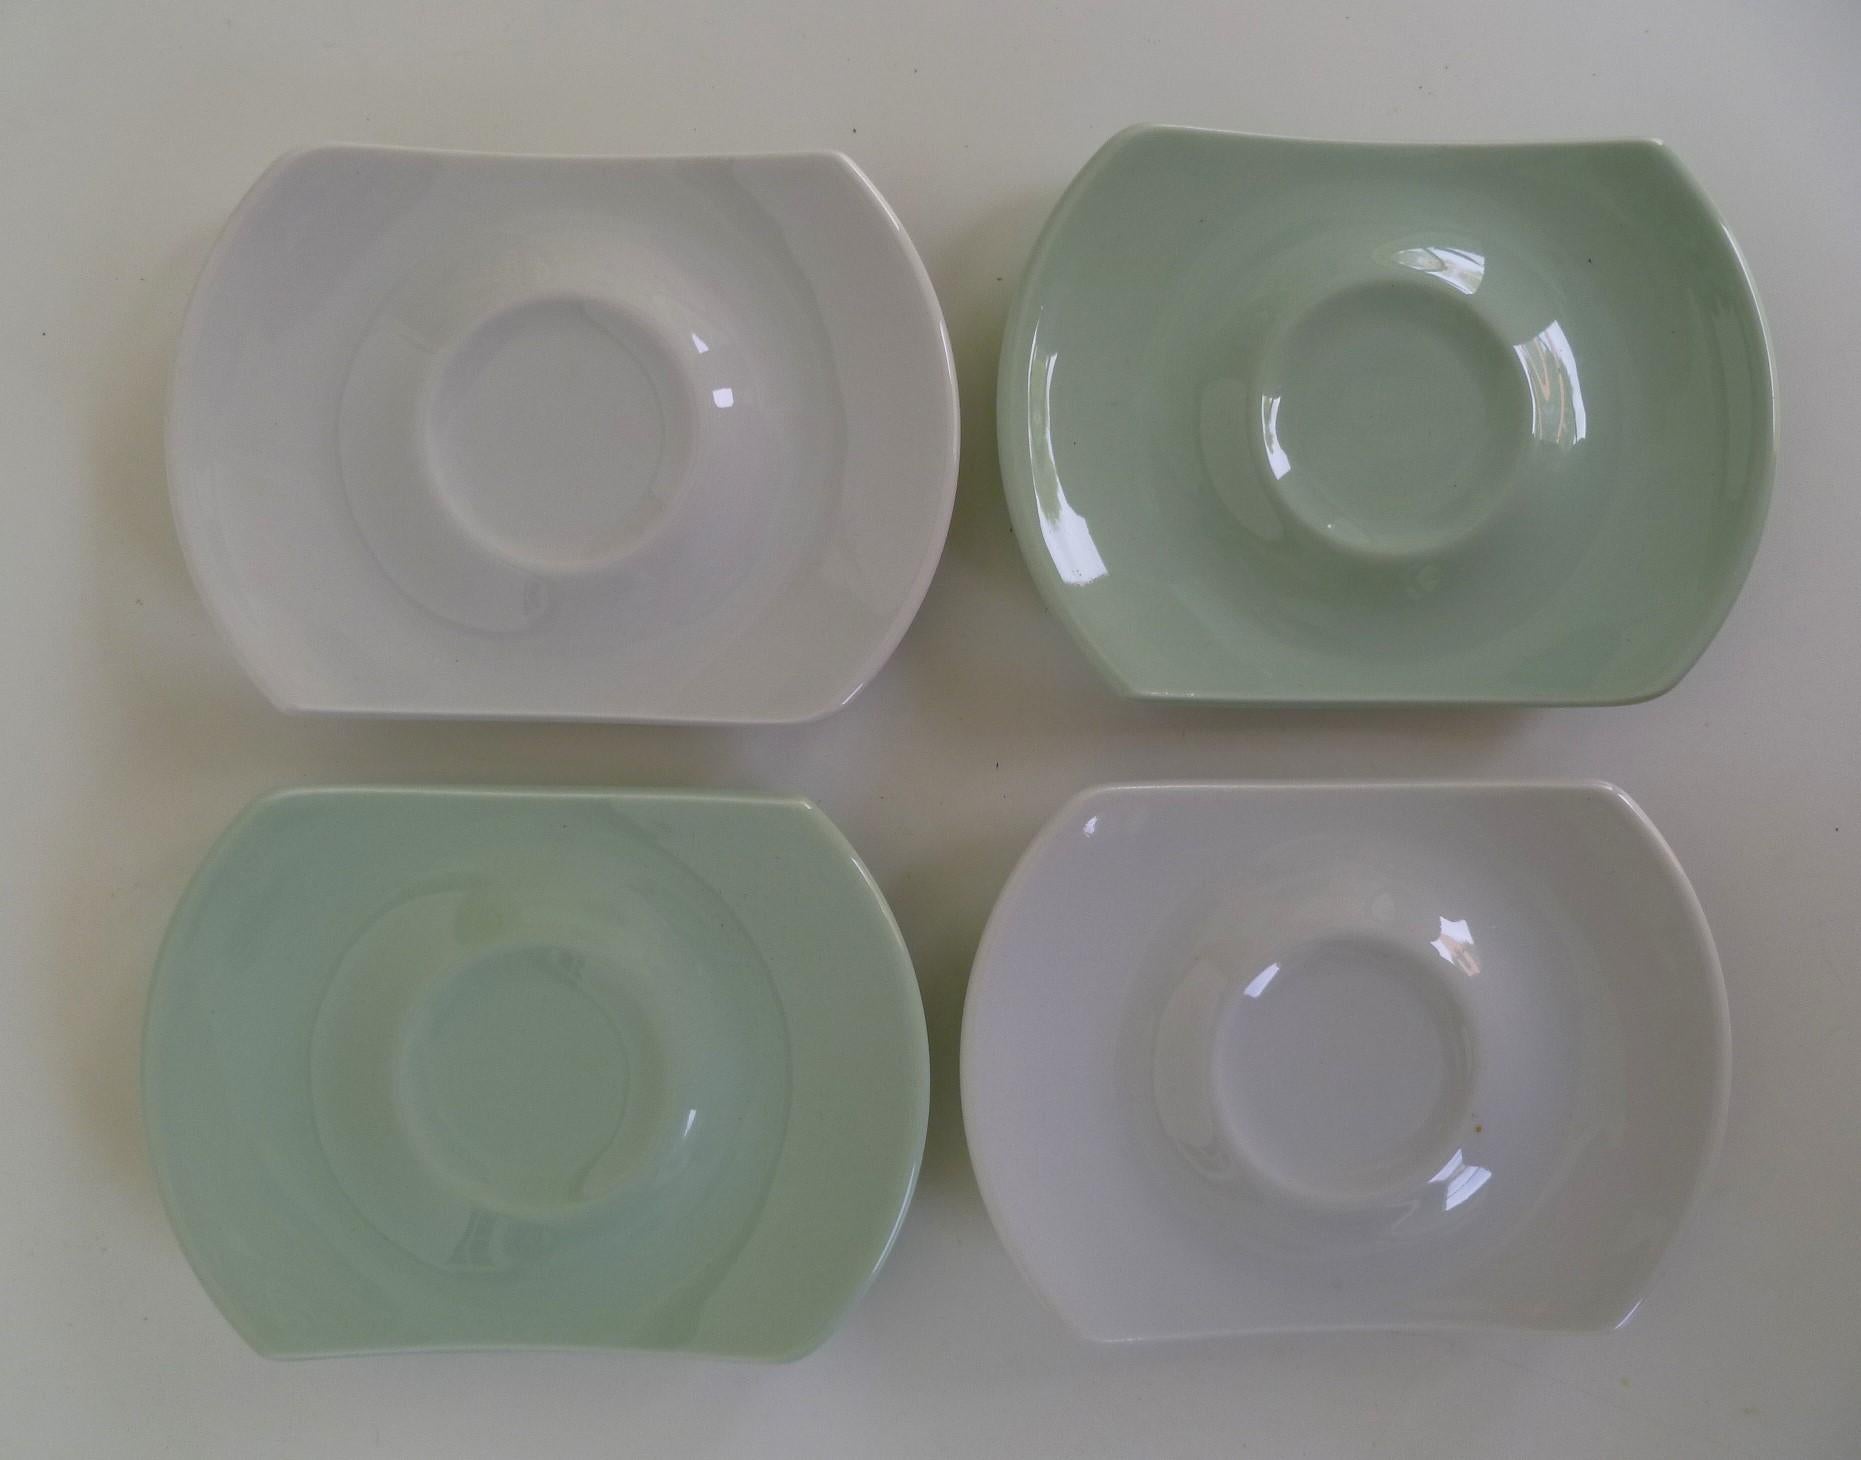 Ceramic Daniel Buren Illy Collection 2004 Bianco Verde Expresso Cups and Saucers